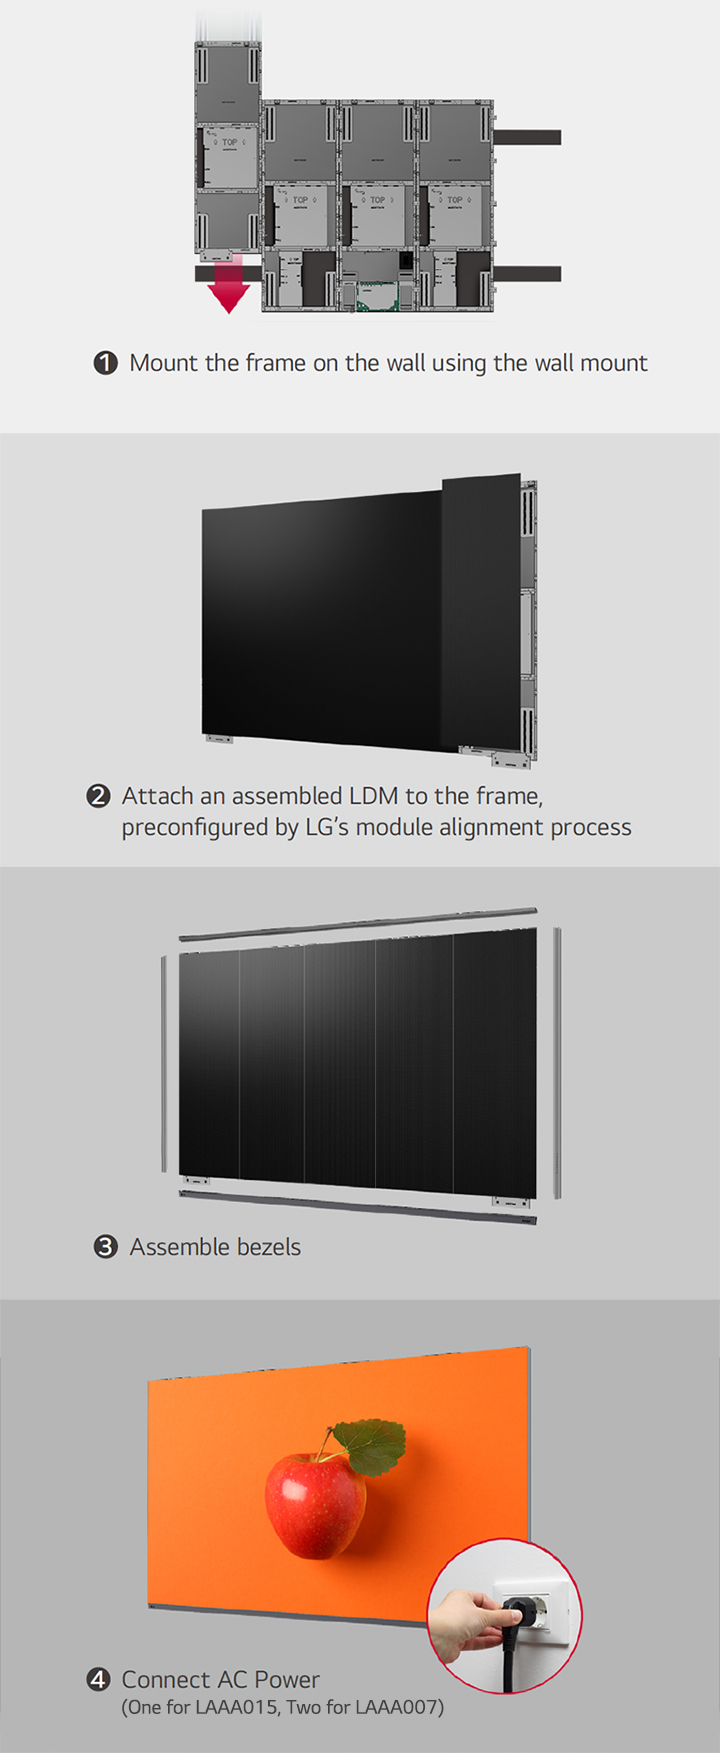 This consists of a total of 4 images showing the steps to mount the frame on the wall using the wall mount, attach the 5 units of an assembled LDM to the frame, assemble bezels, and connect AC power.